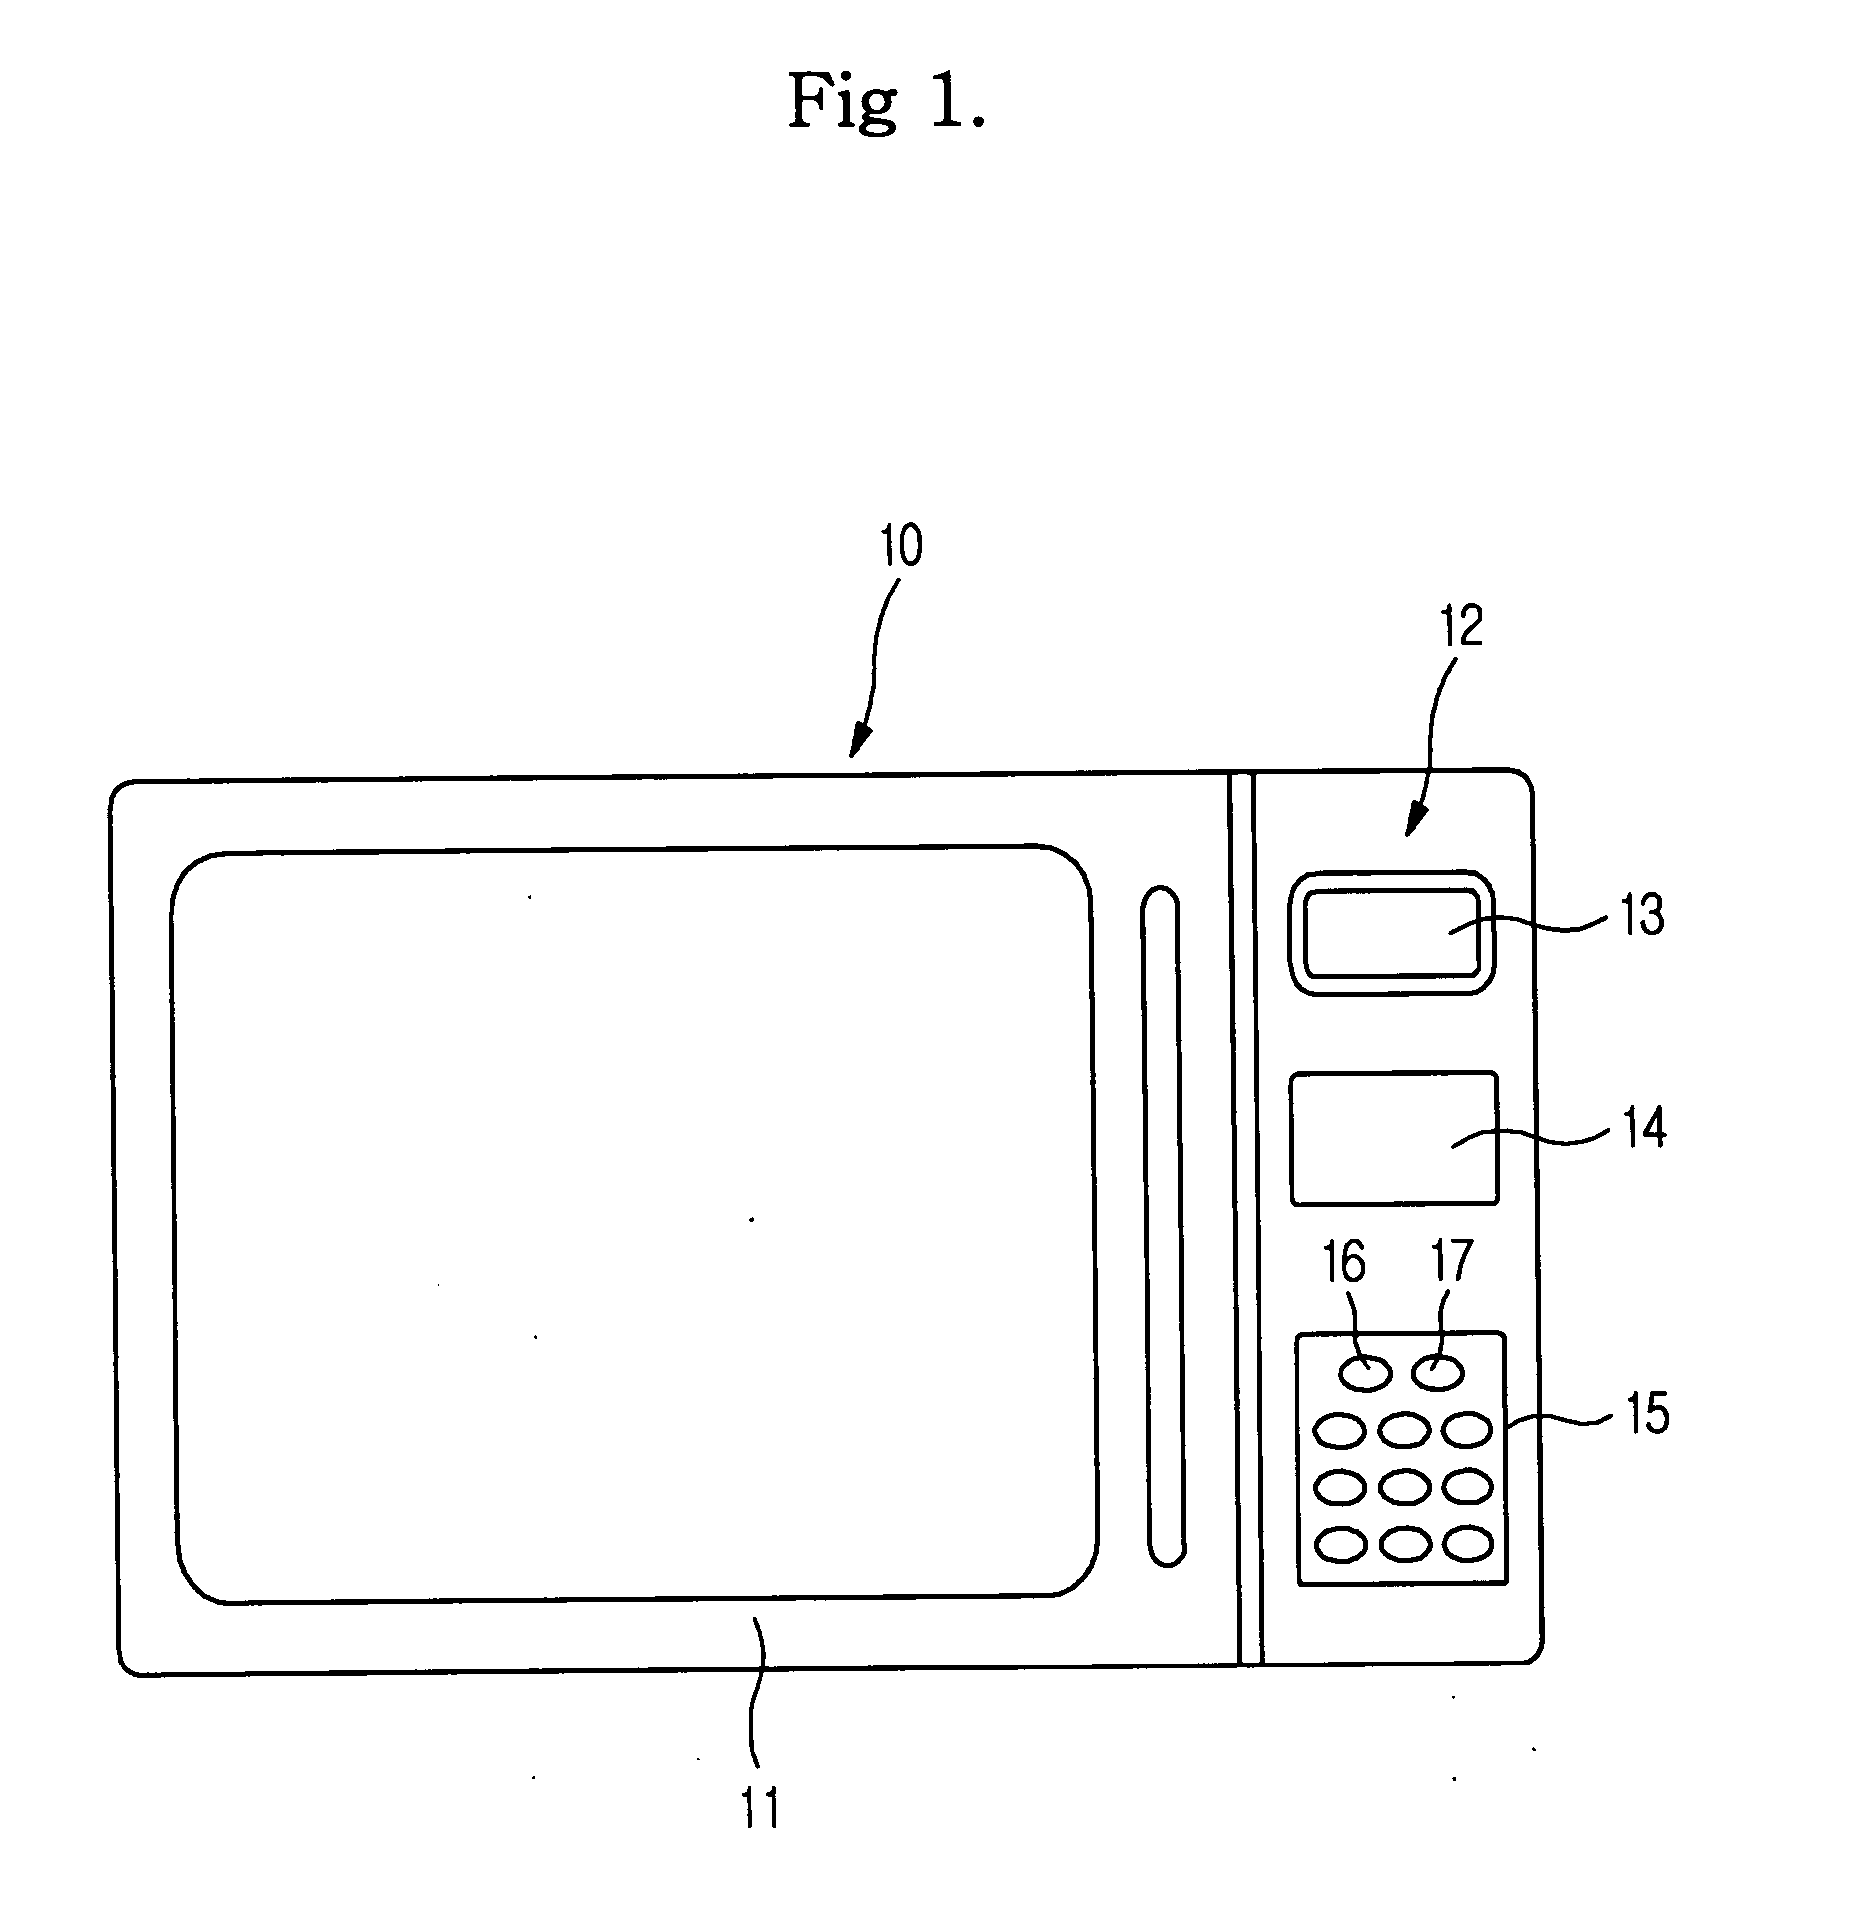 Bar-code reading cooking apparatus and method